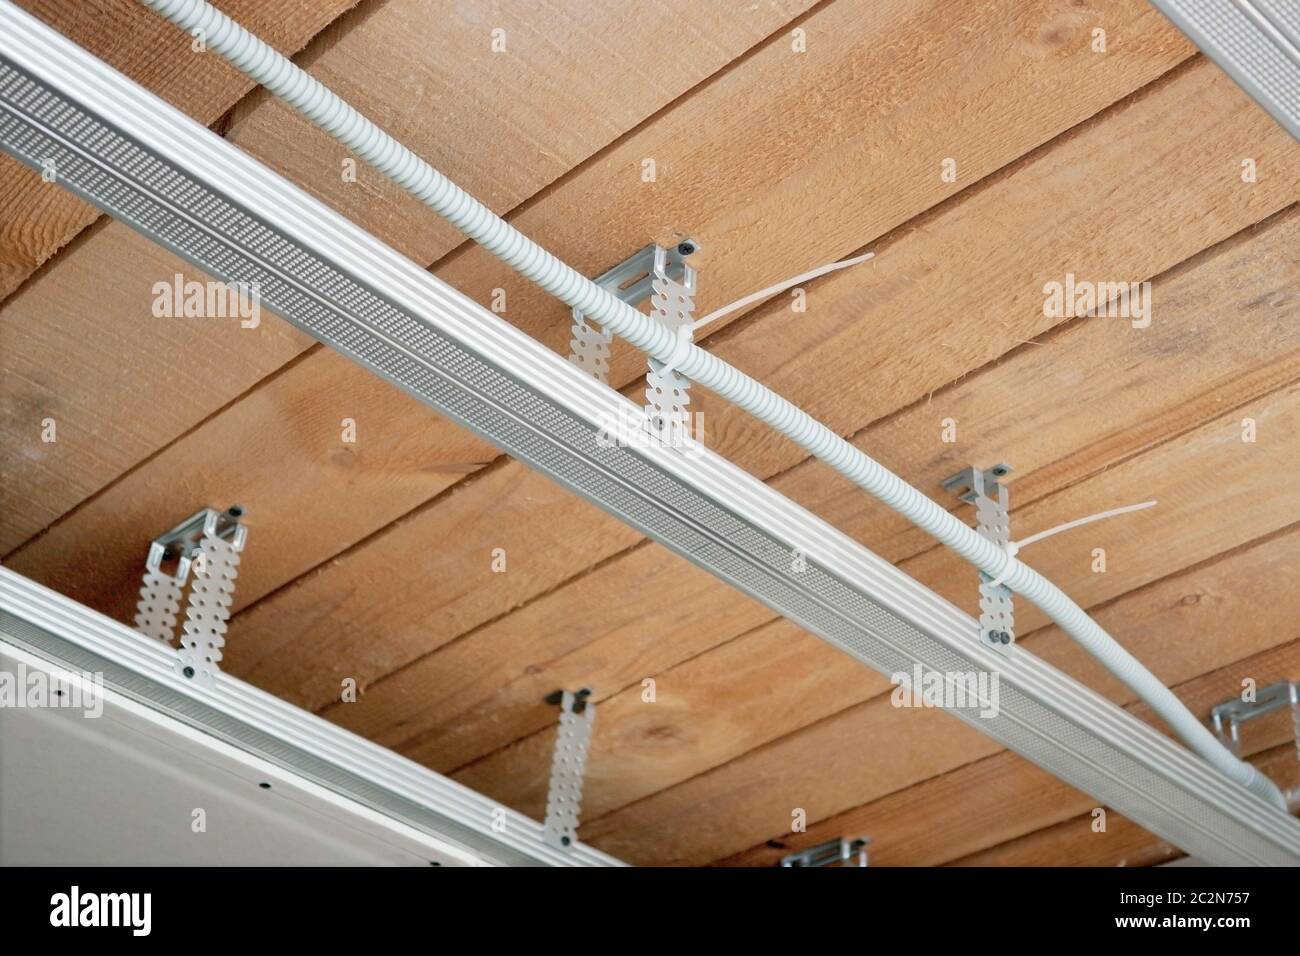 How to Hide Electrical Wires on Ceiling - S3DA Design - Structure & MEP